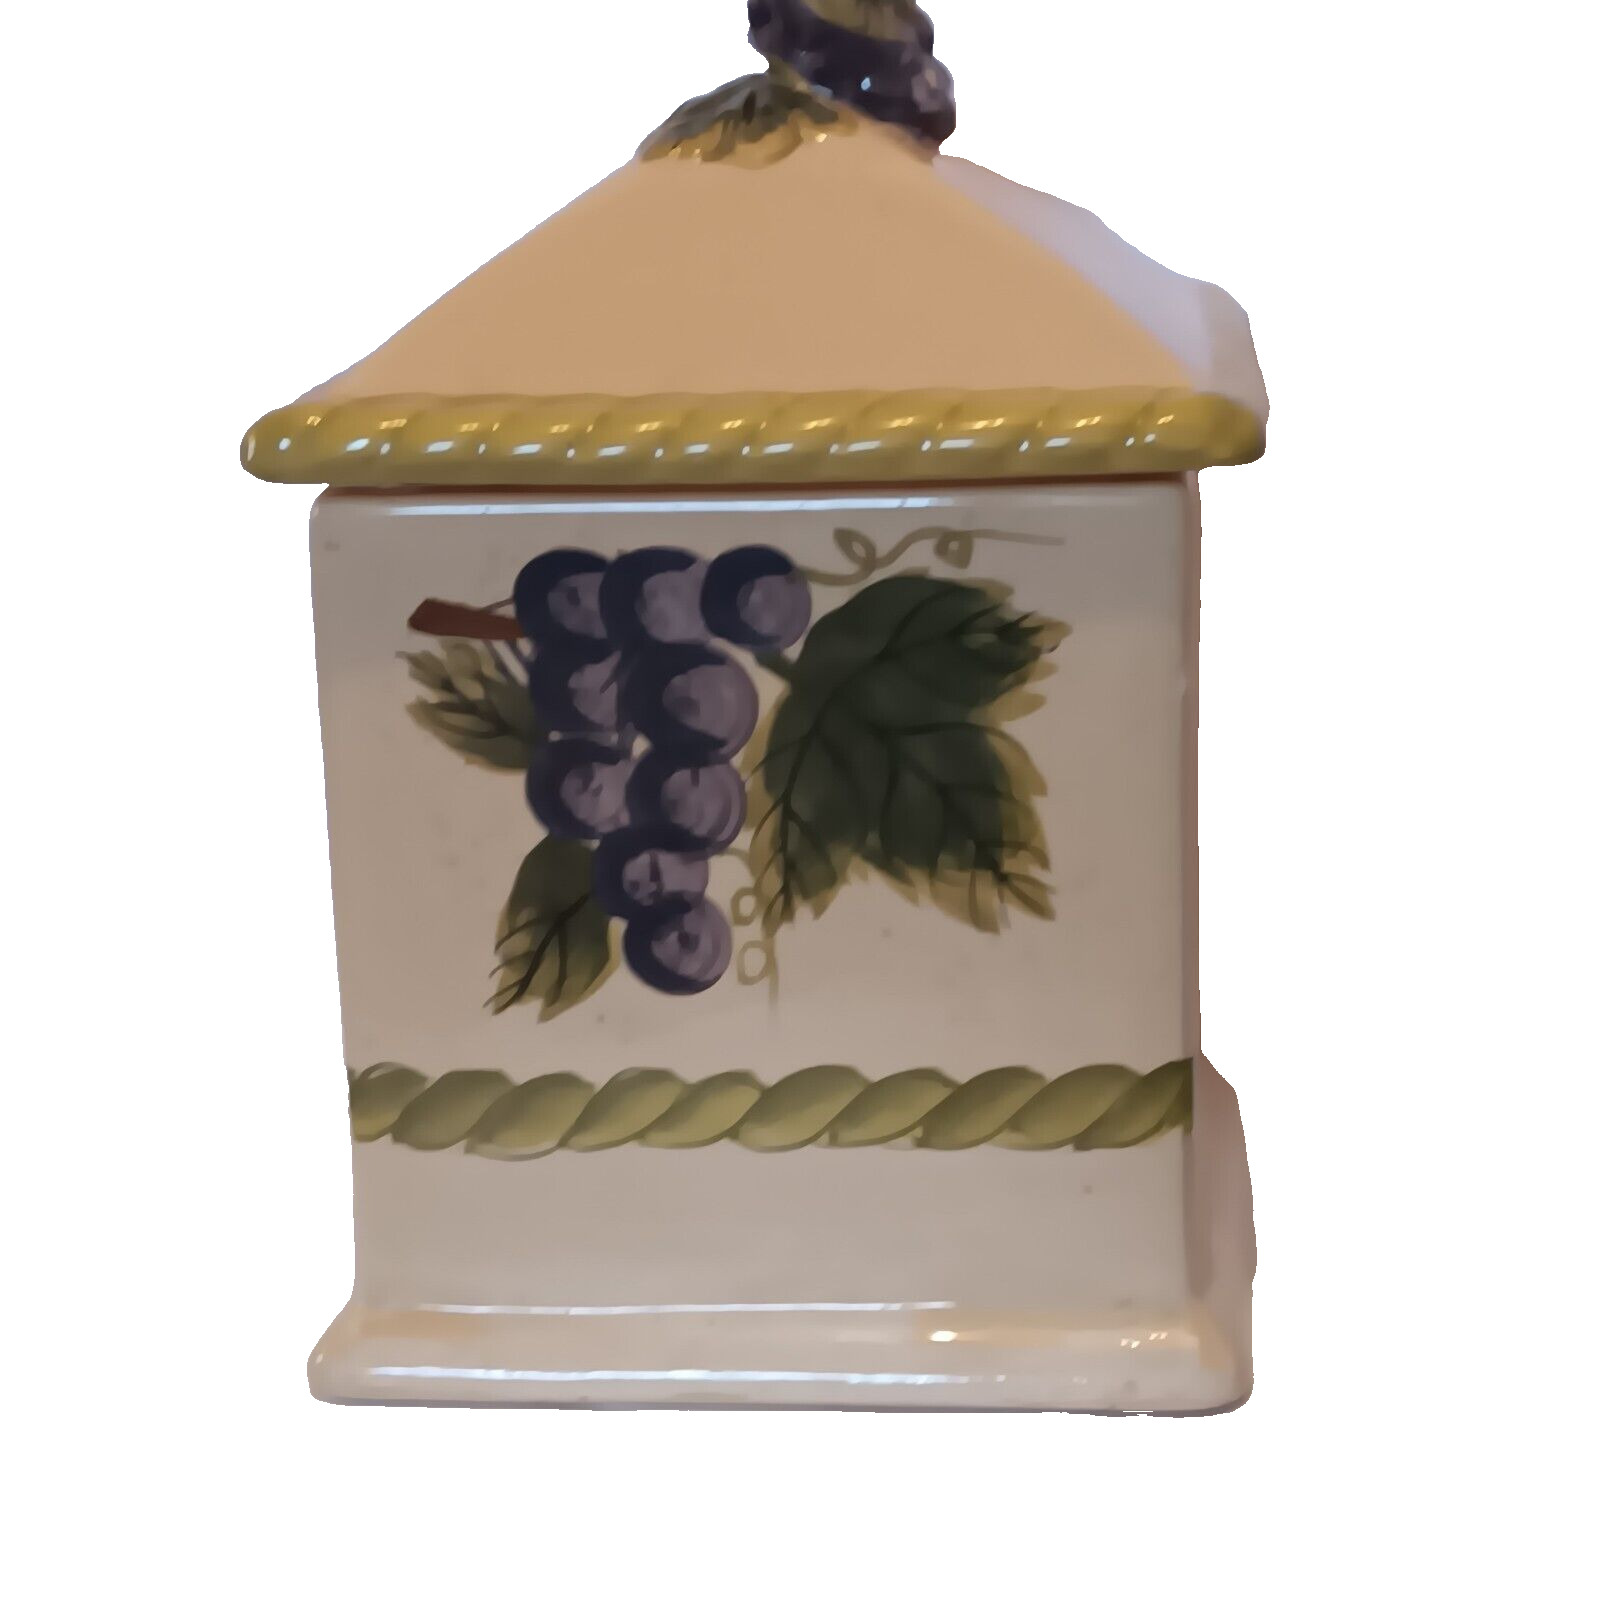 Granny Delight a Square Ceramic Cookie Jar From WCL With Rope And Grape Pattern